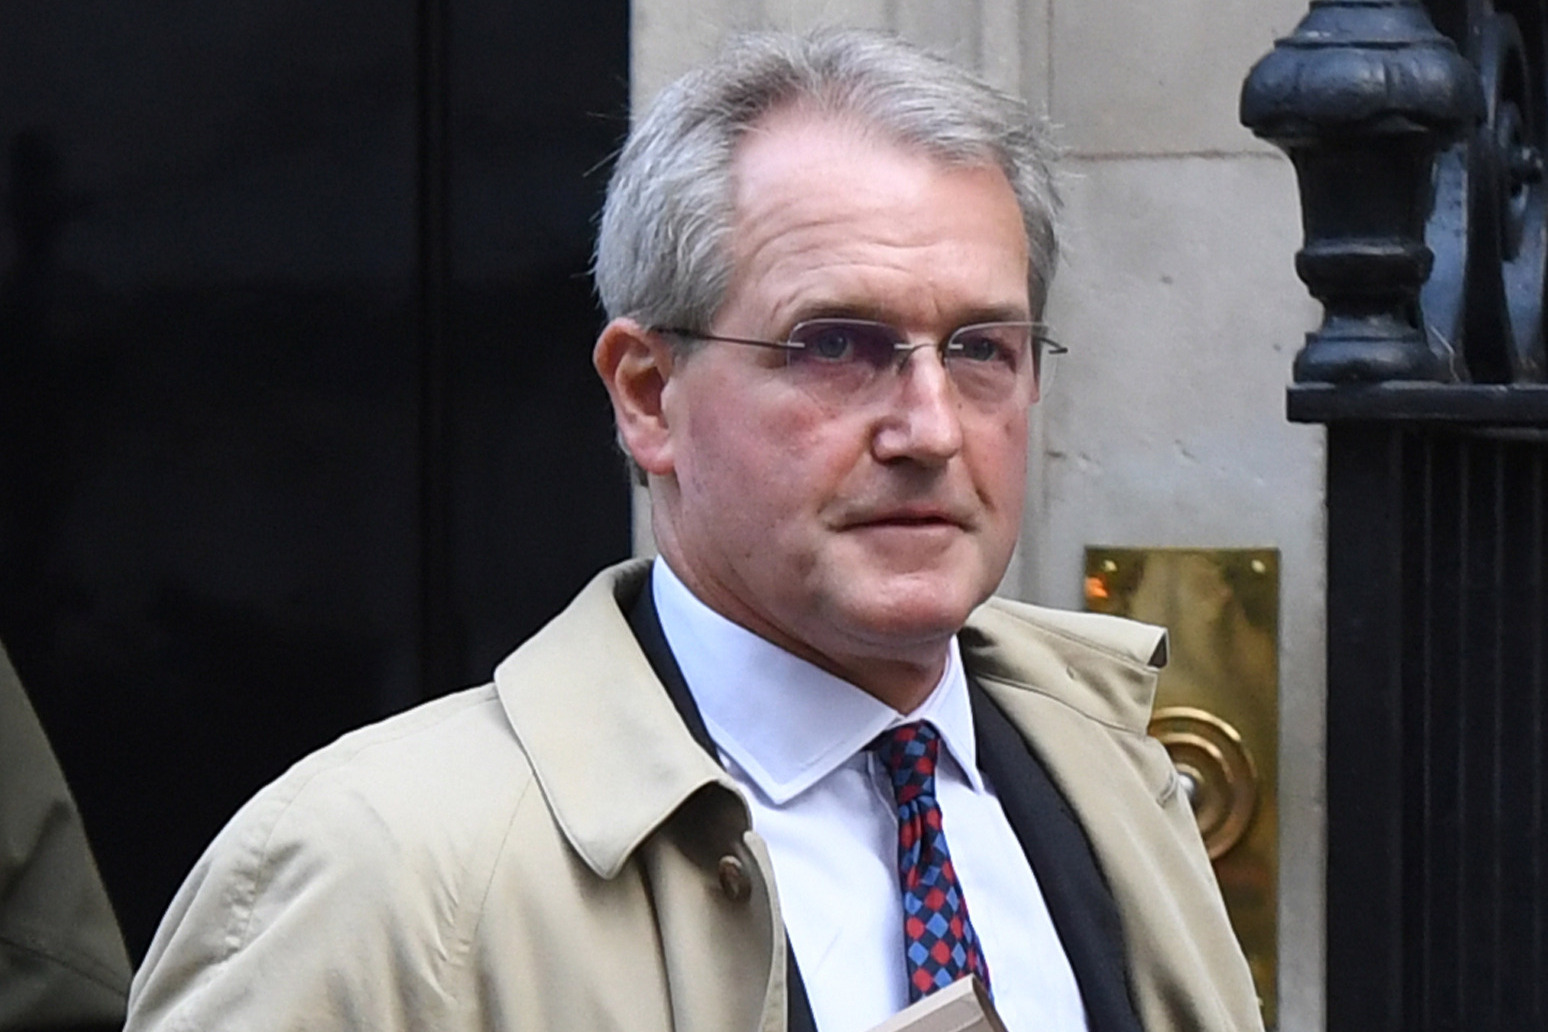 Ex-Cabinet minister faces 30-day Commons ban for breach of lobbying rules 